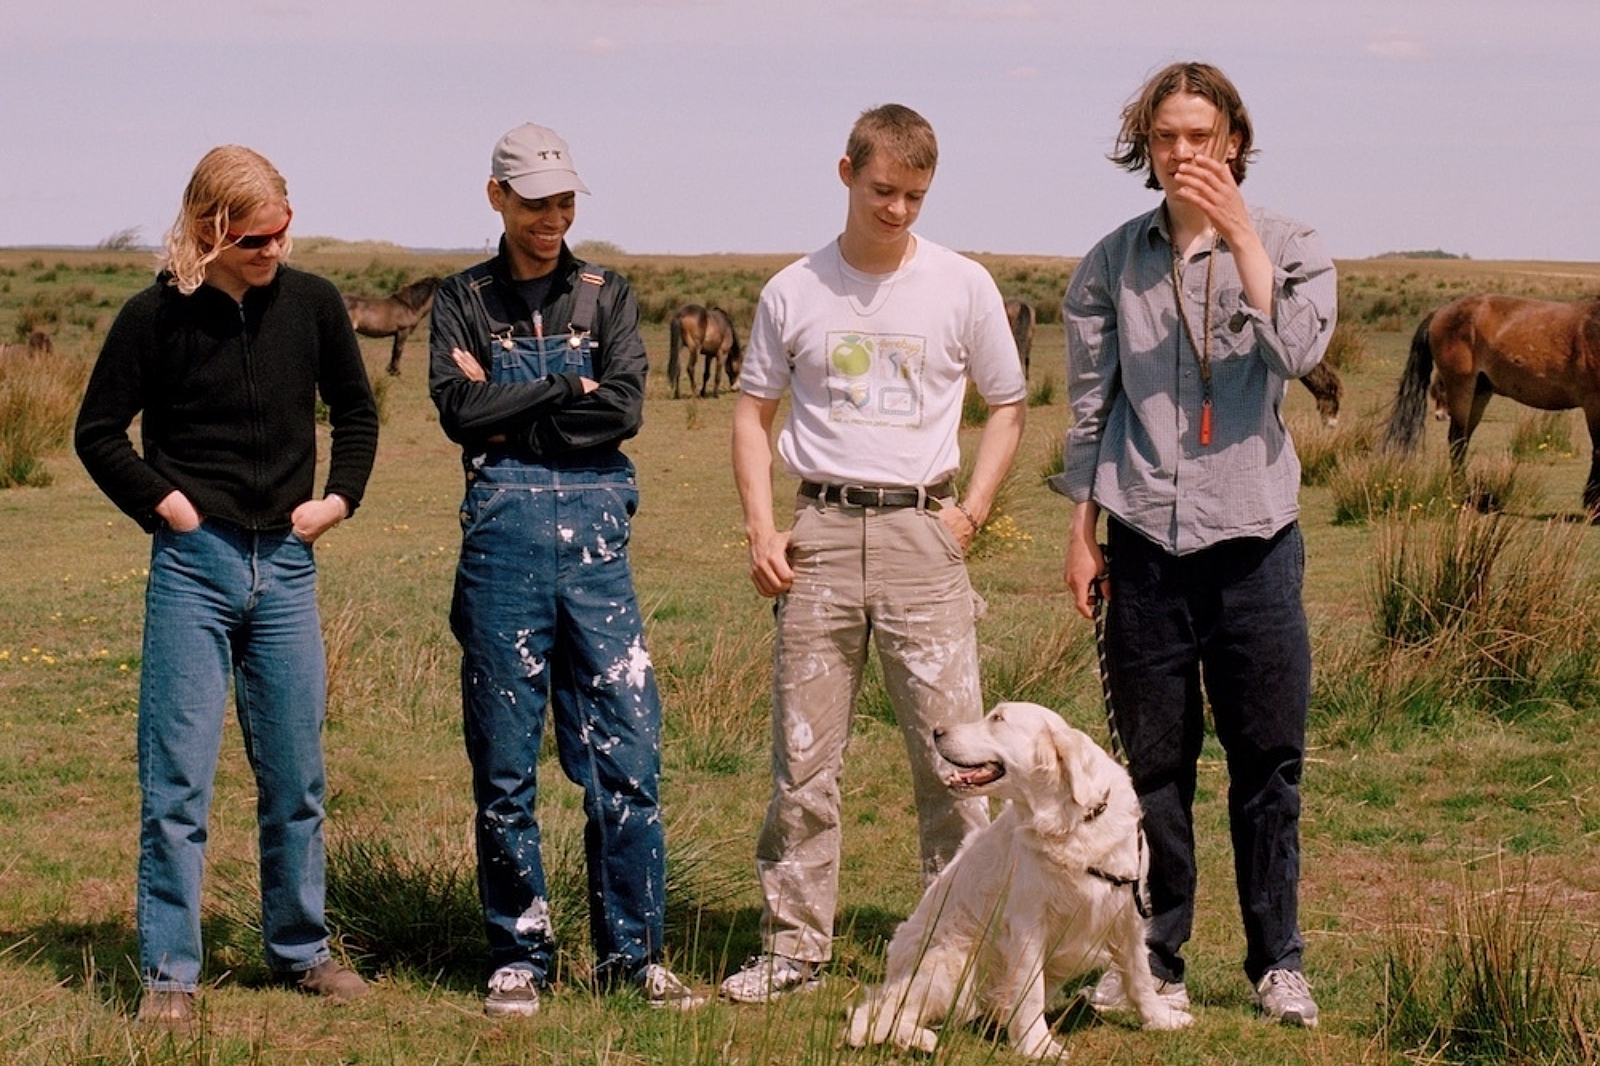 Liss air ‘Nobody Really Cares’ video